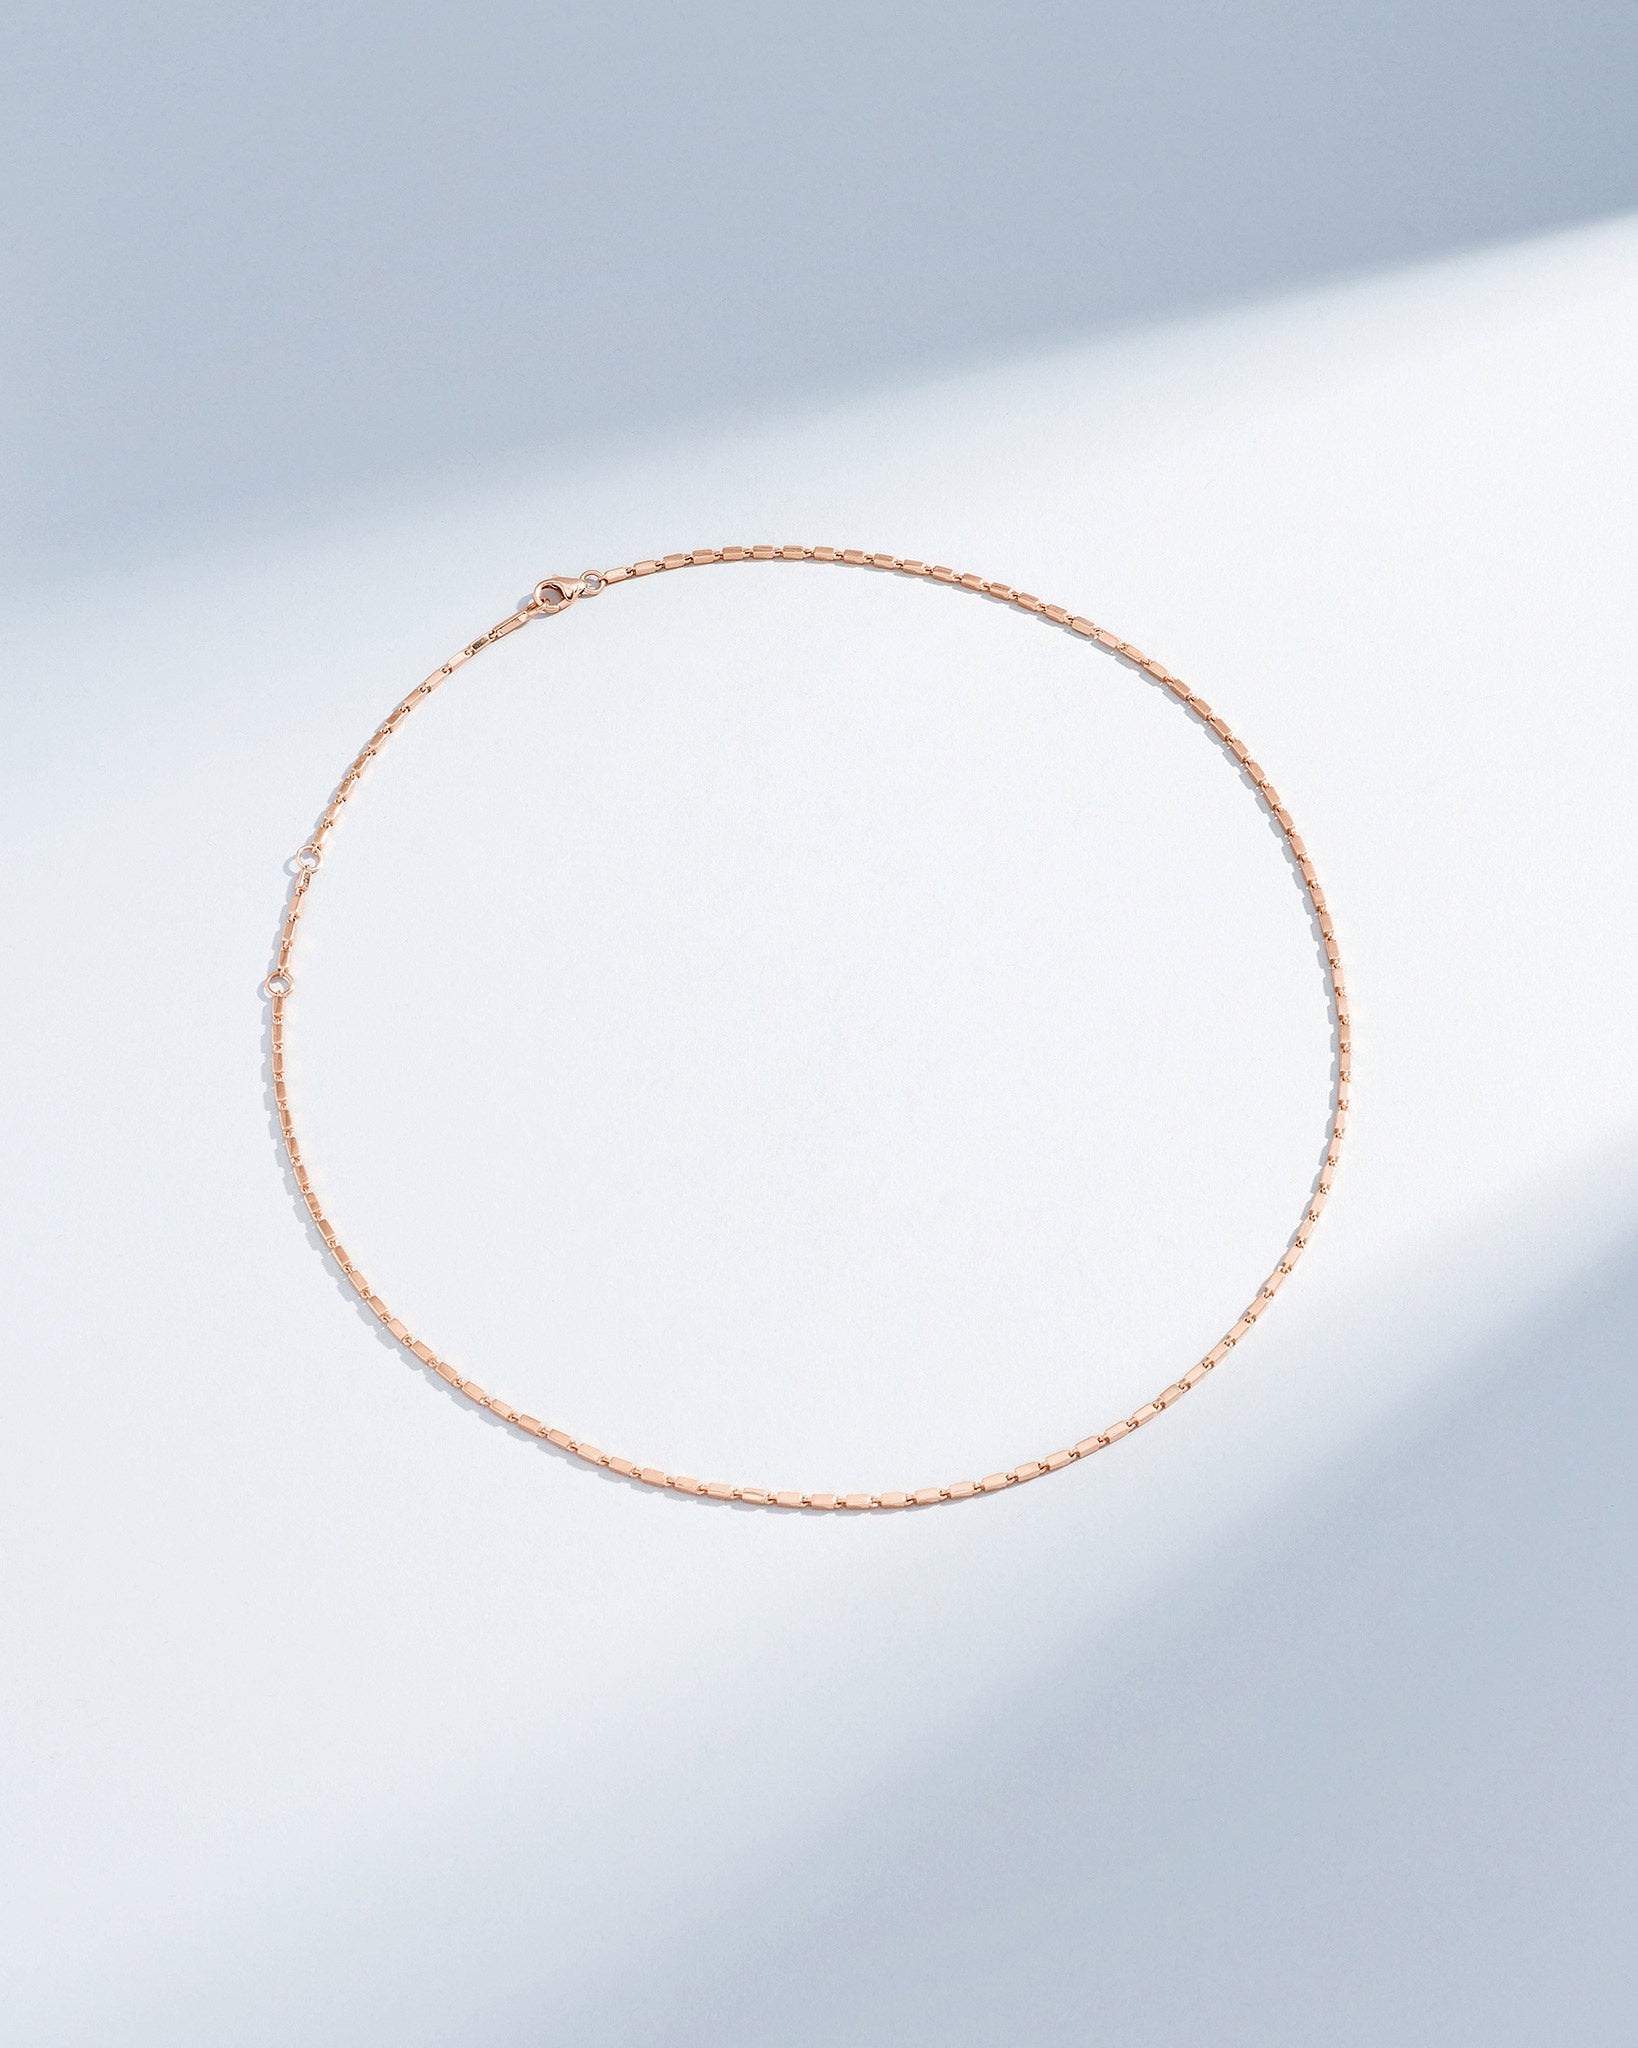 Suzanne Kalan Block-Chain Thin Necklace in 18k rose gold